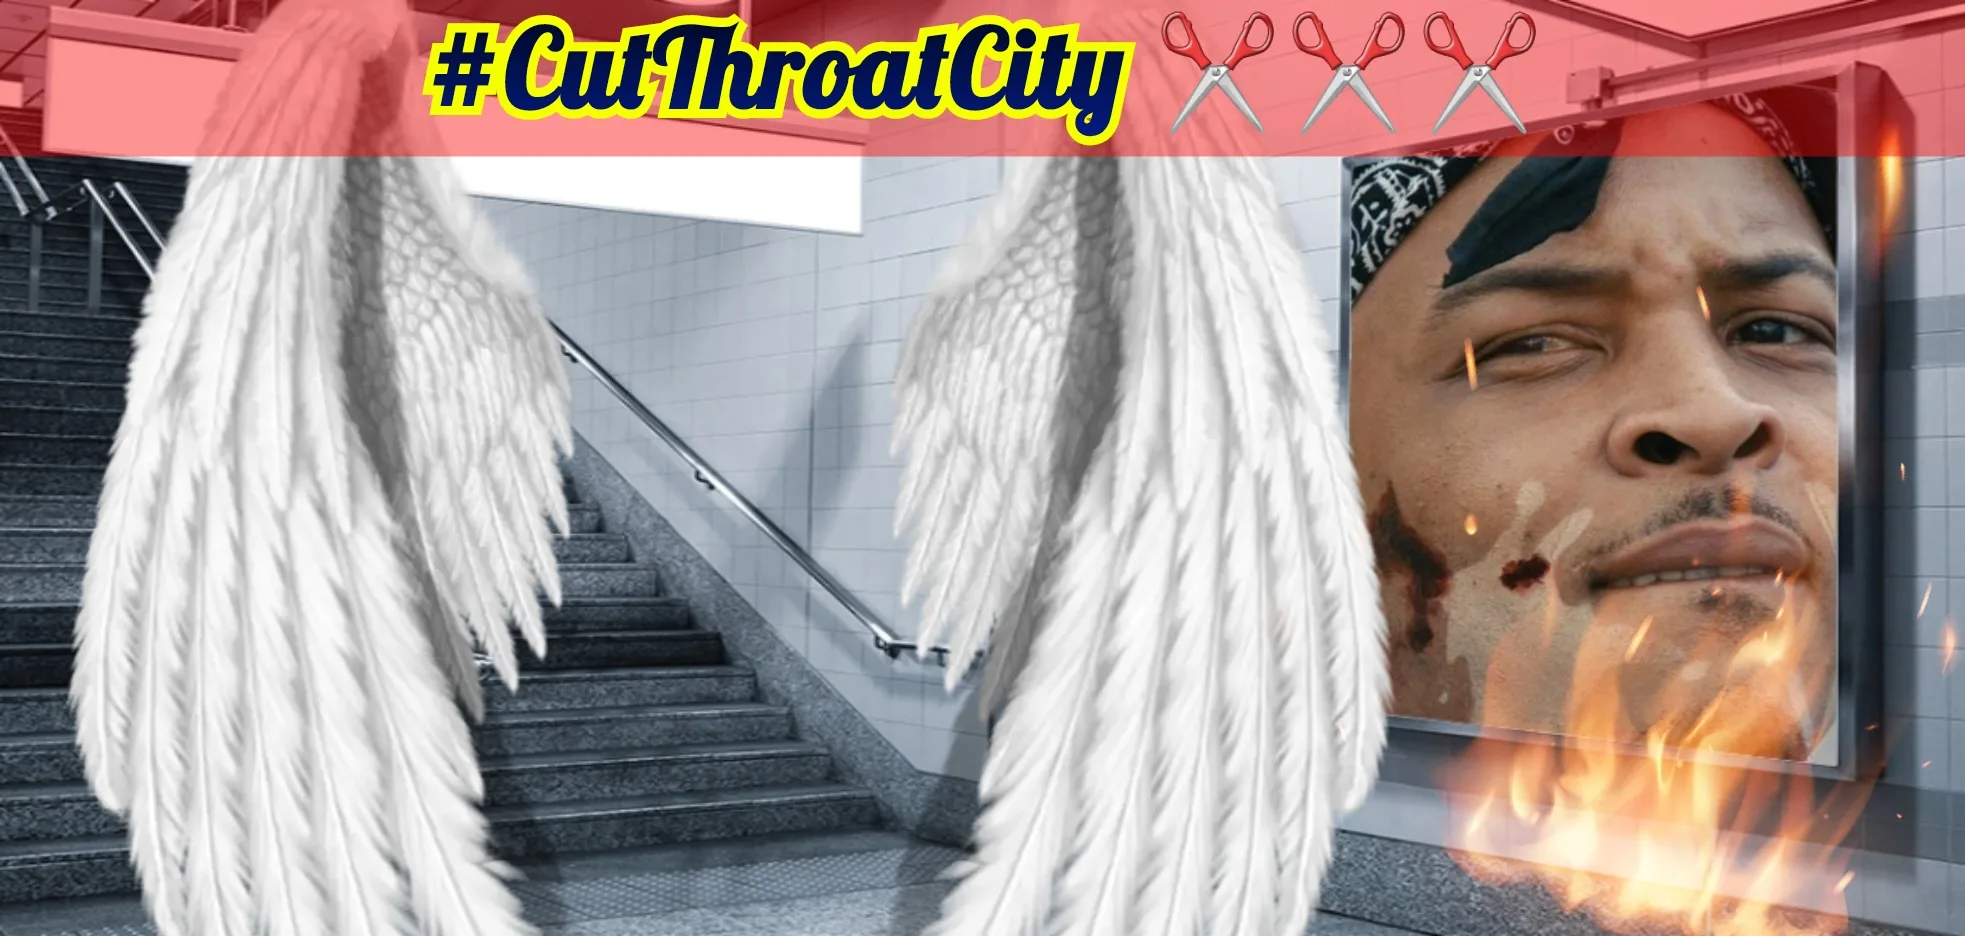 “CUT THROAT CITY” Is Definitely Not On FEMA’s Committee Which Leaves For Gentlemen Taking Care Of Their Own City! post thumbnail image